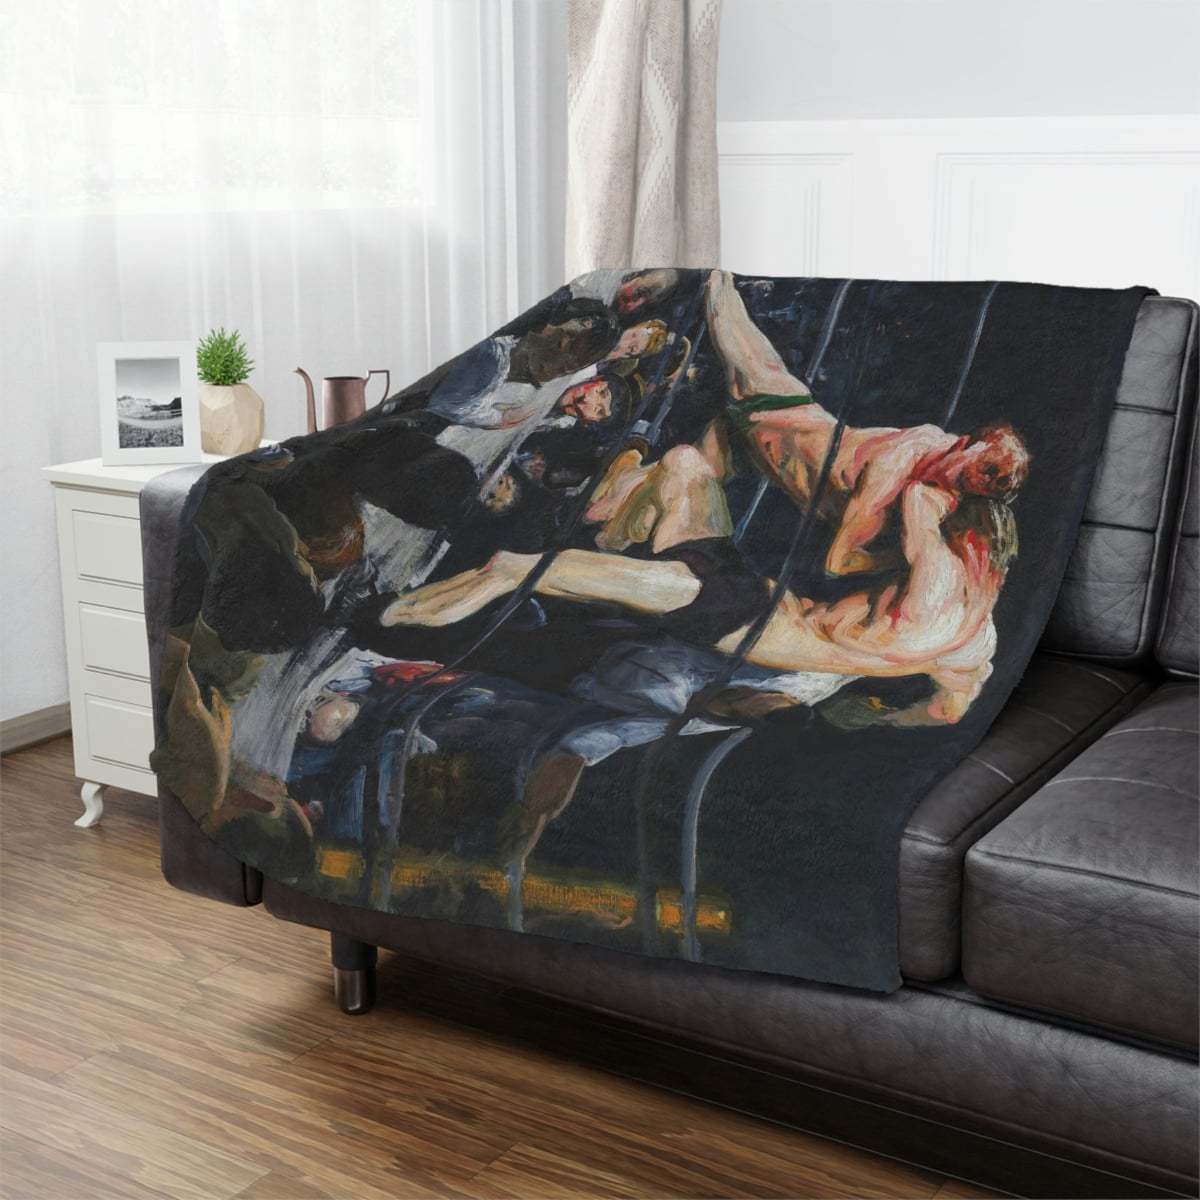 Soft and Cozy Bellows Art Blanket for Your Home